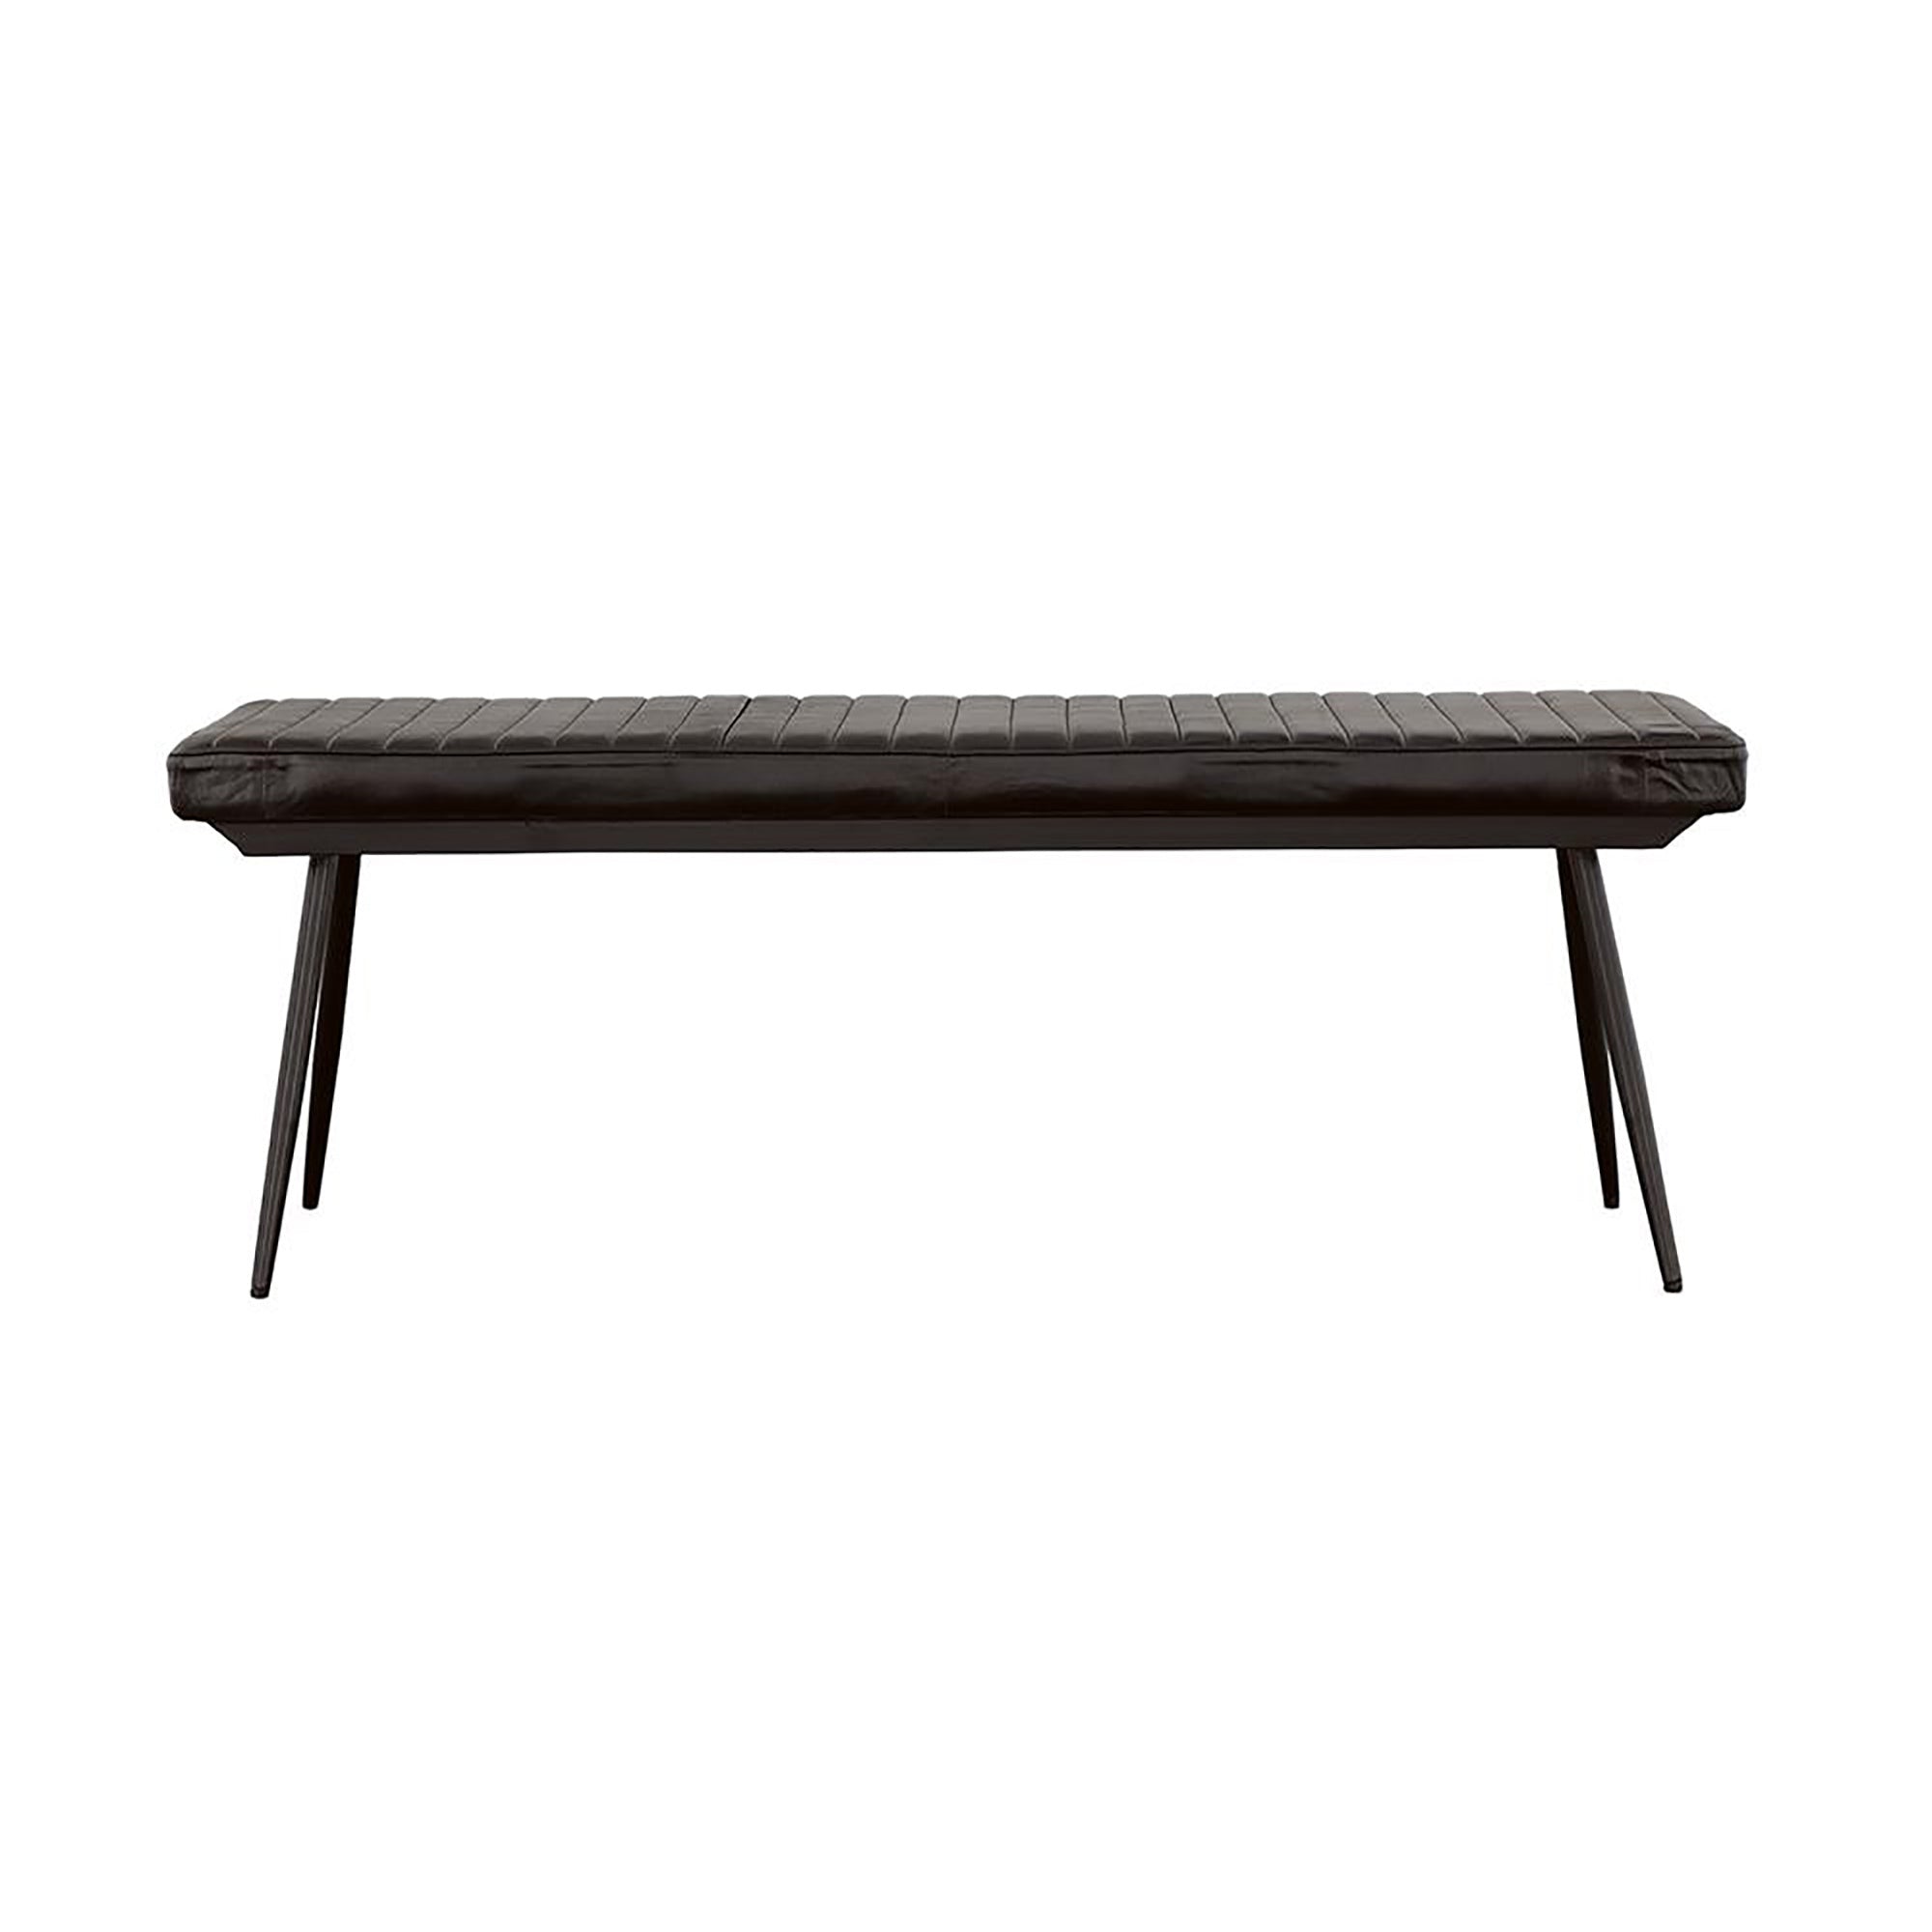 Espresso and Black Tufted Cushion Side Bench black-dining room-rectangular-industrial-dining